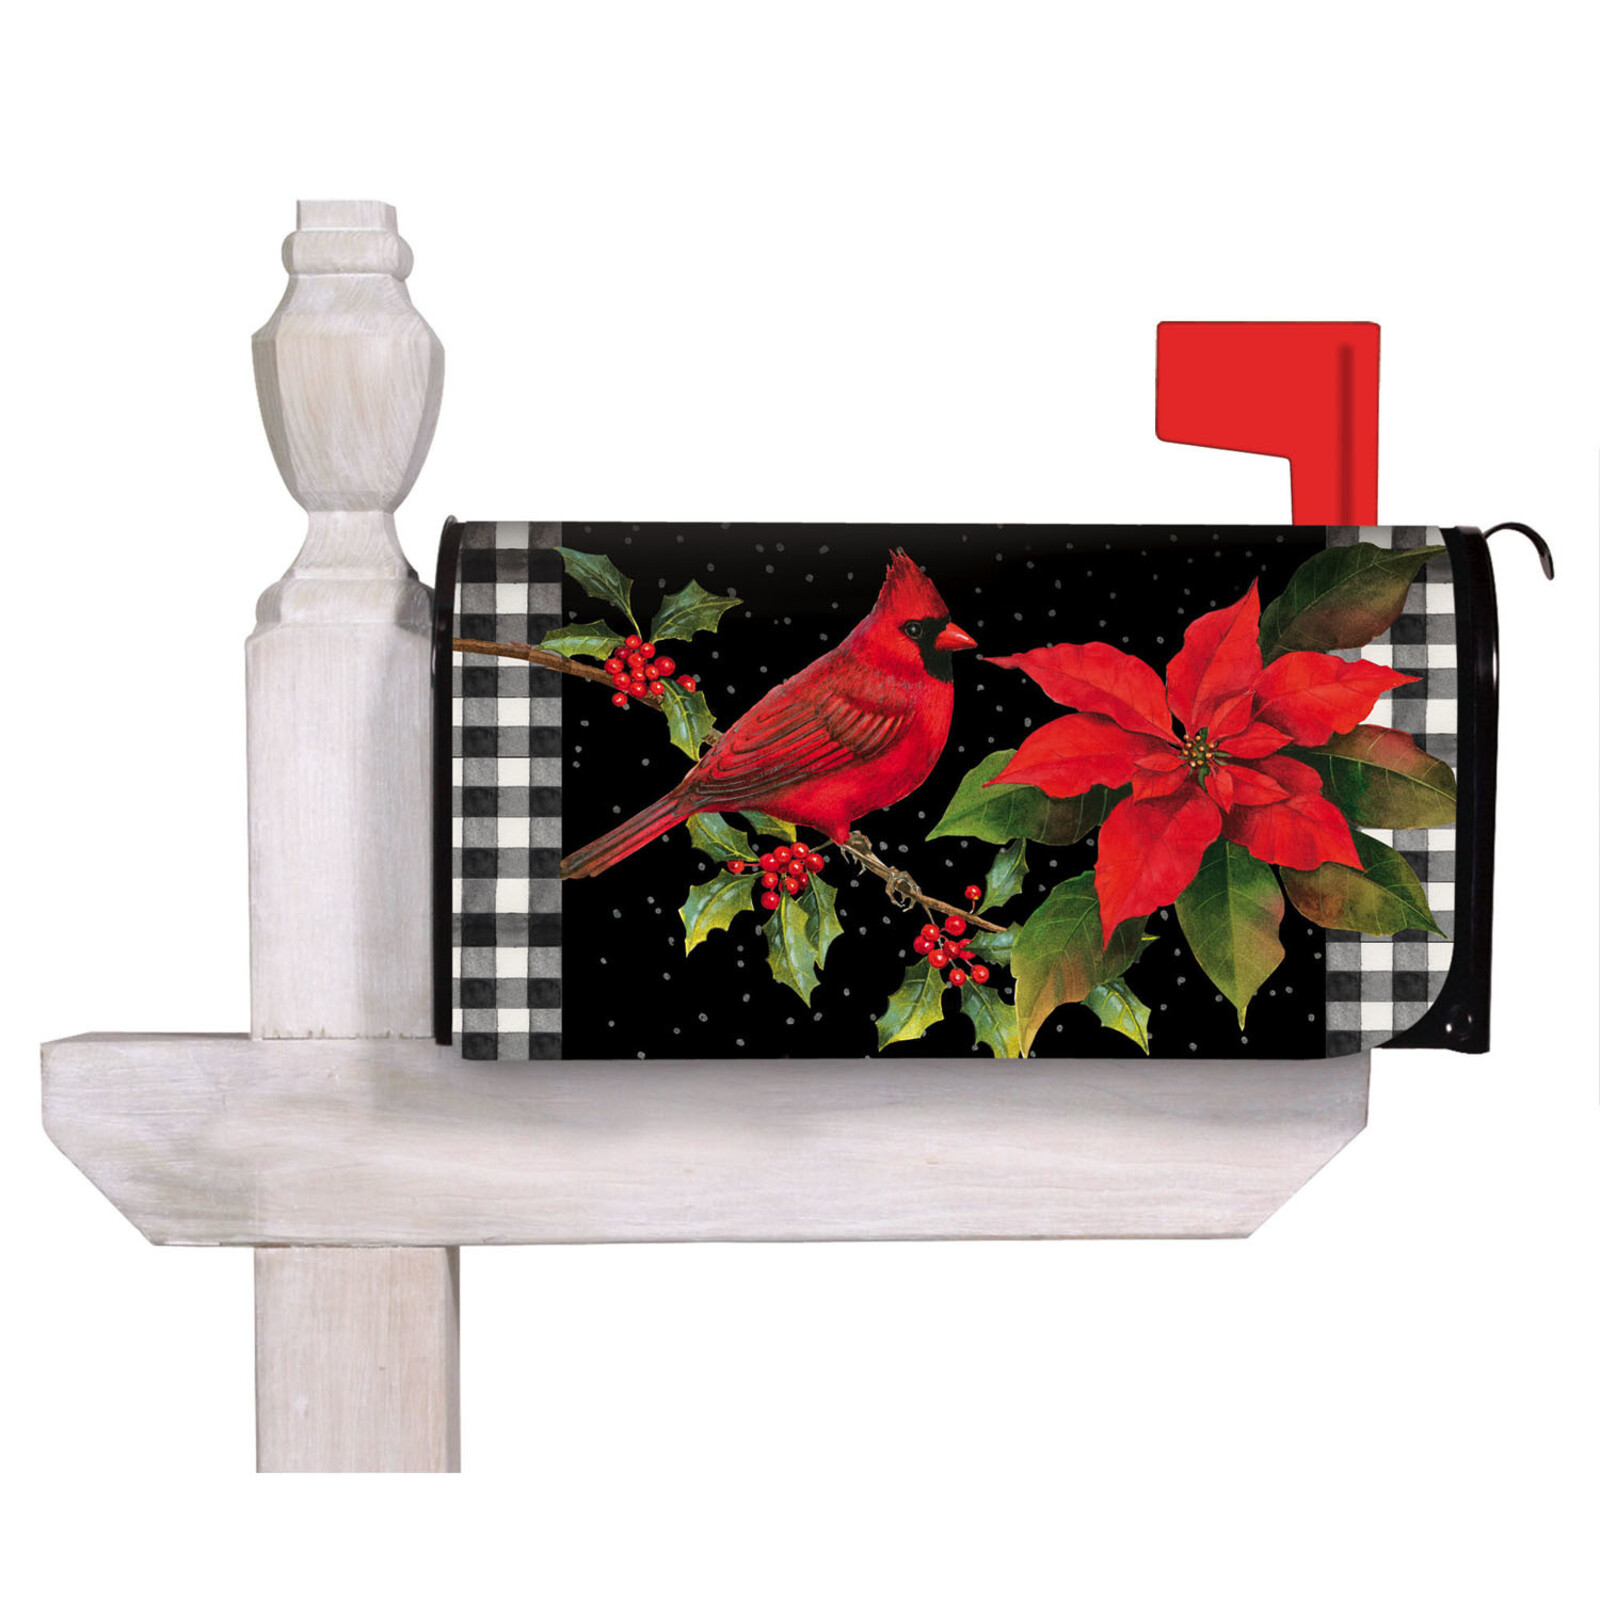 Evergreen Enterprises Cardinal and Holly Mailbox Cover  56778 loading=